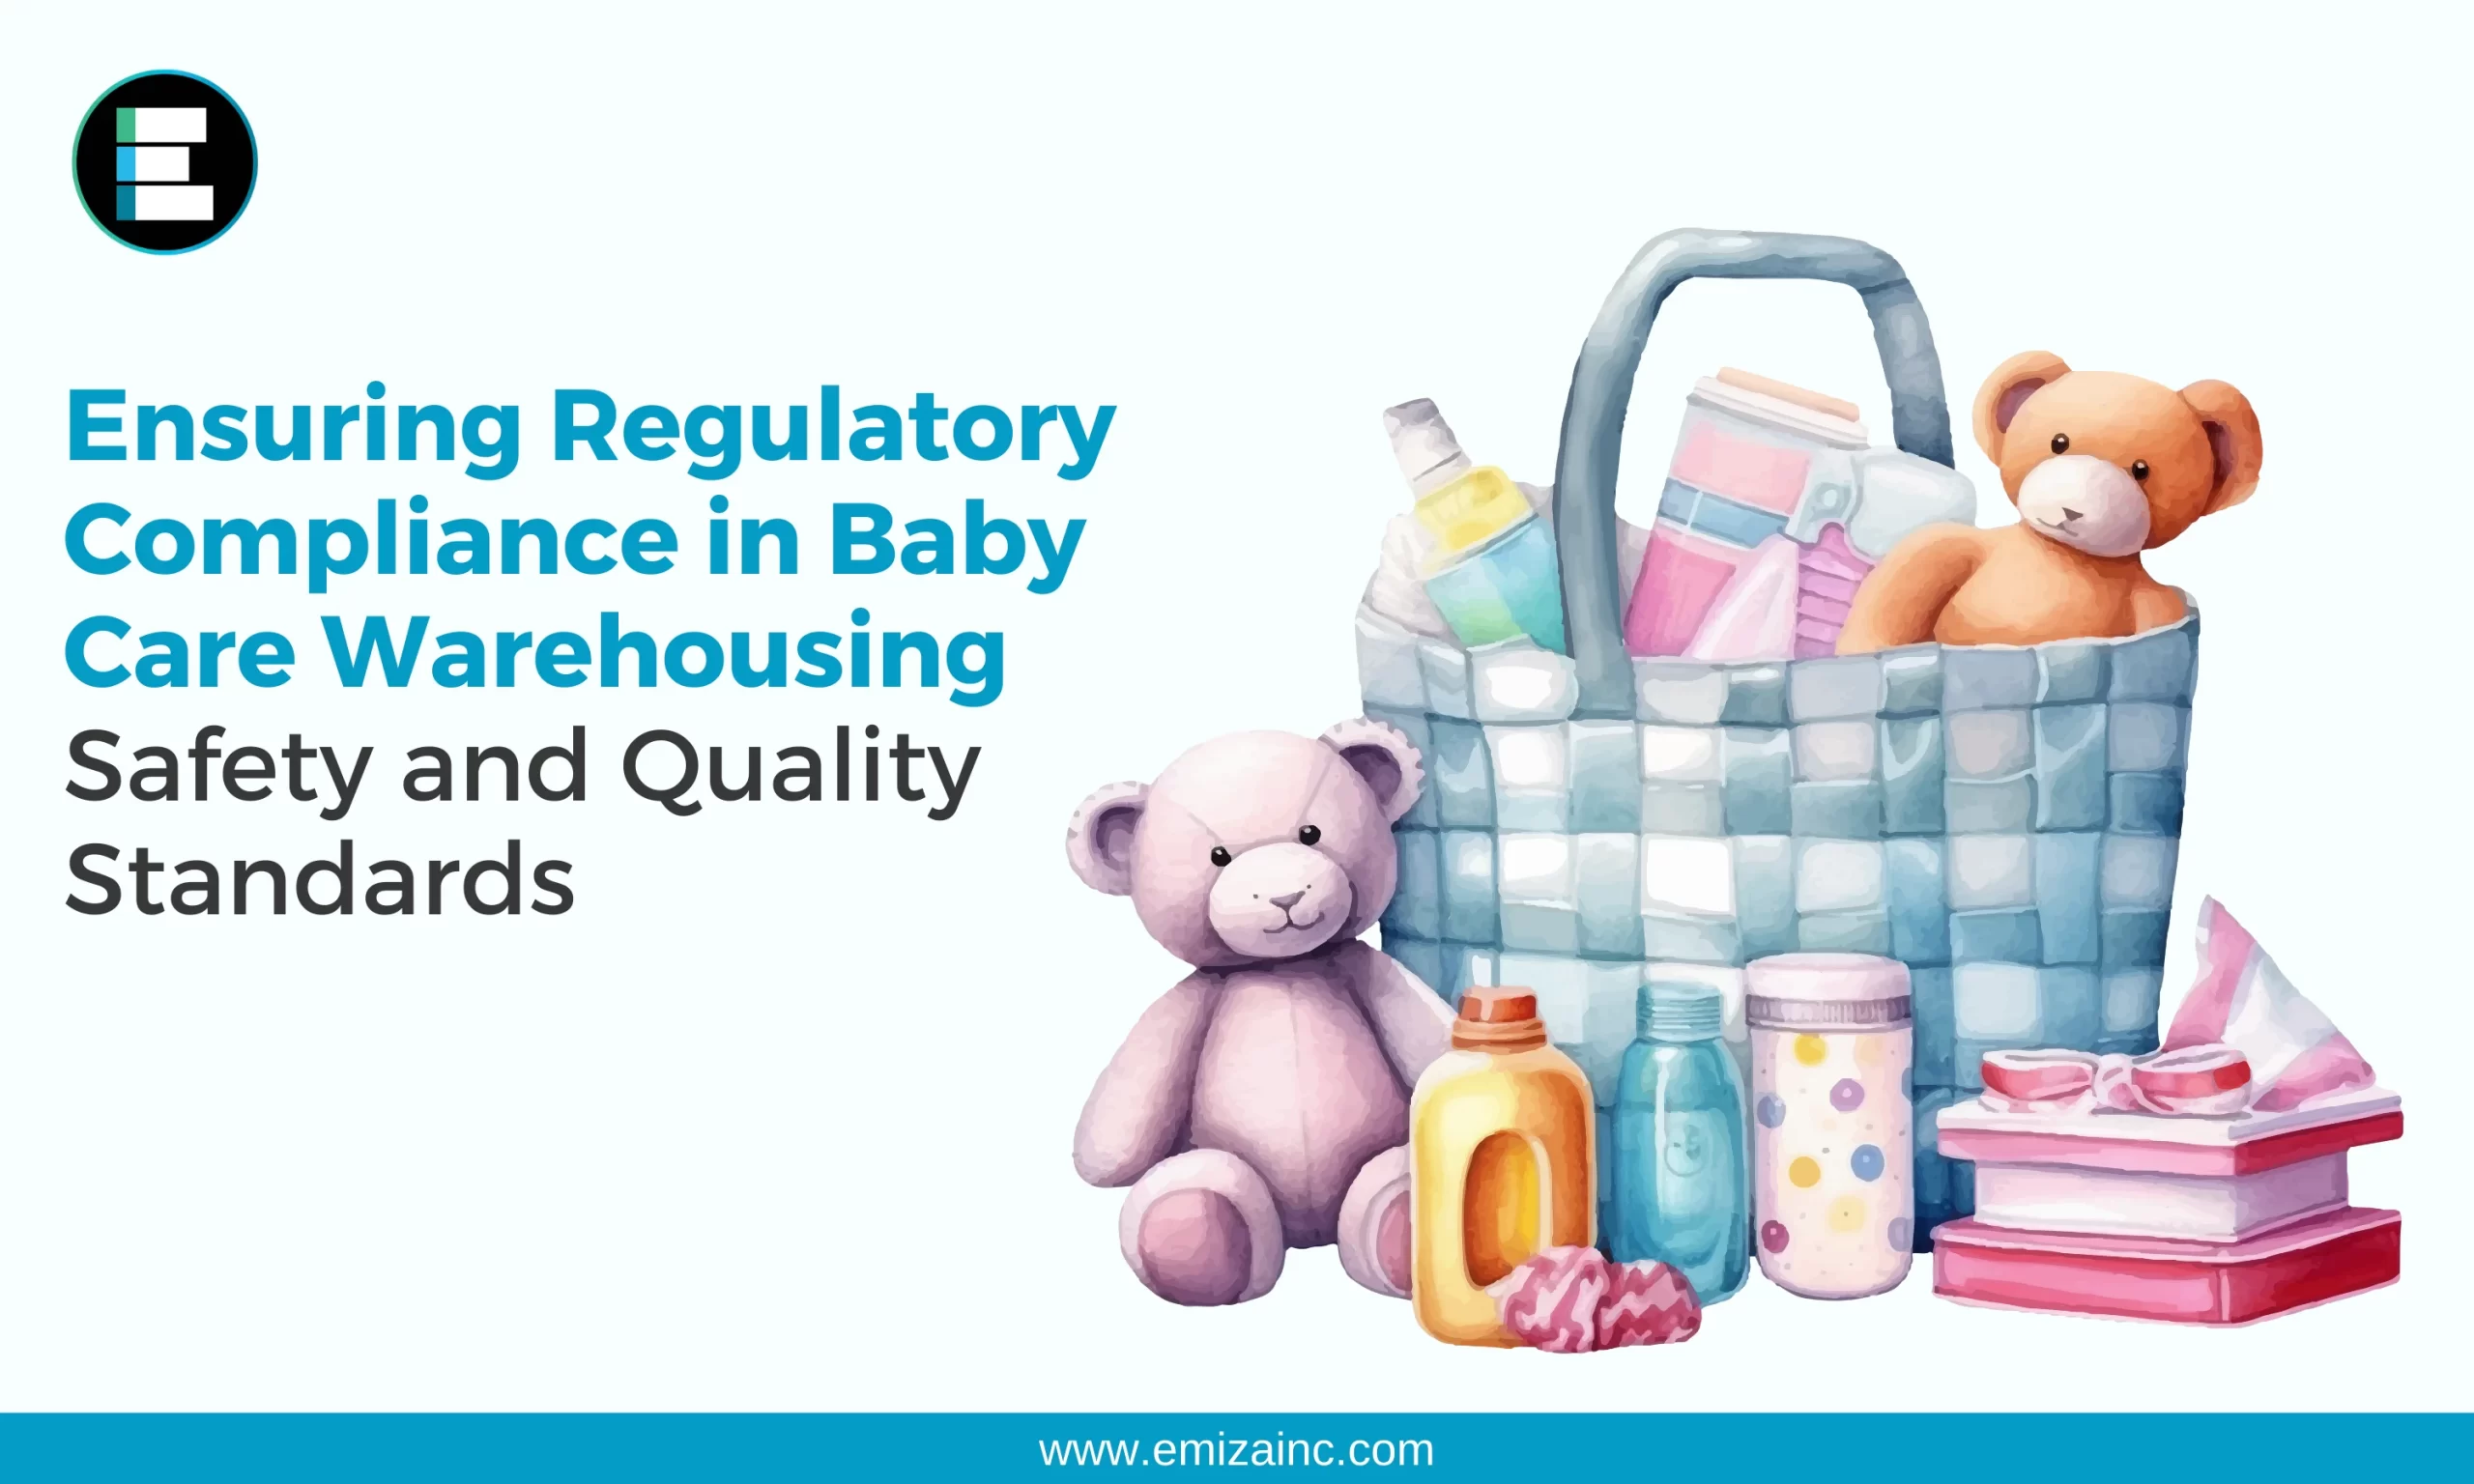 Ensuring Regulatory Compliance in Baby Care Warehousing: Safety and Quality Standards